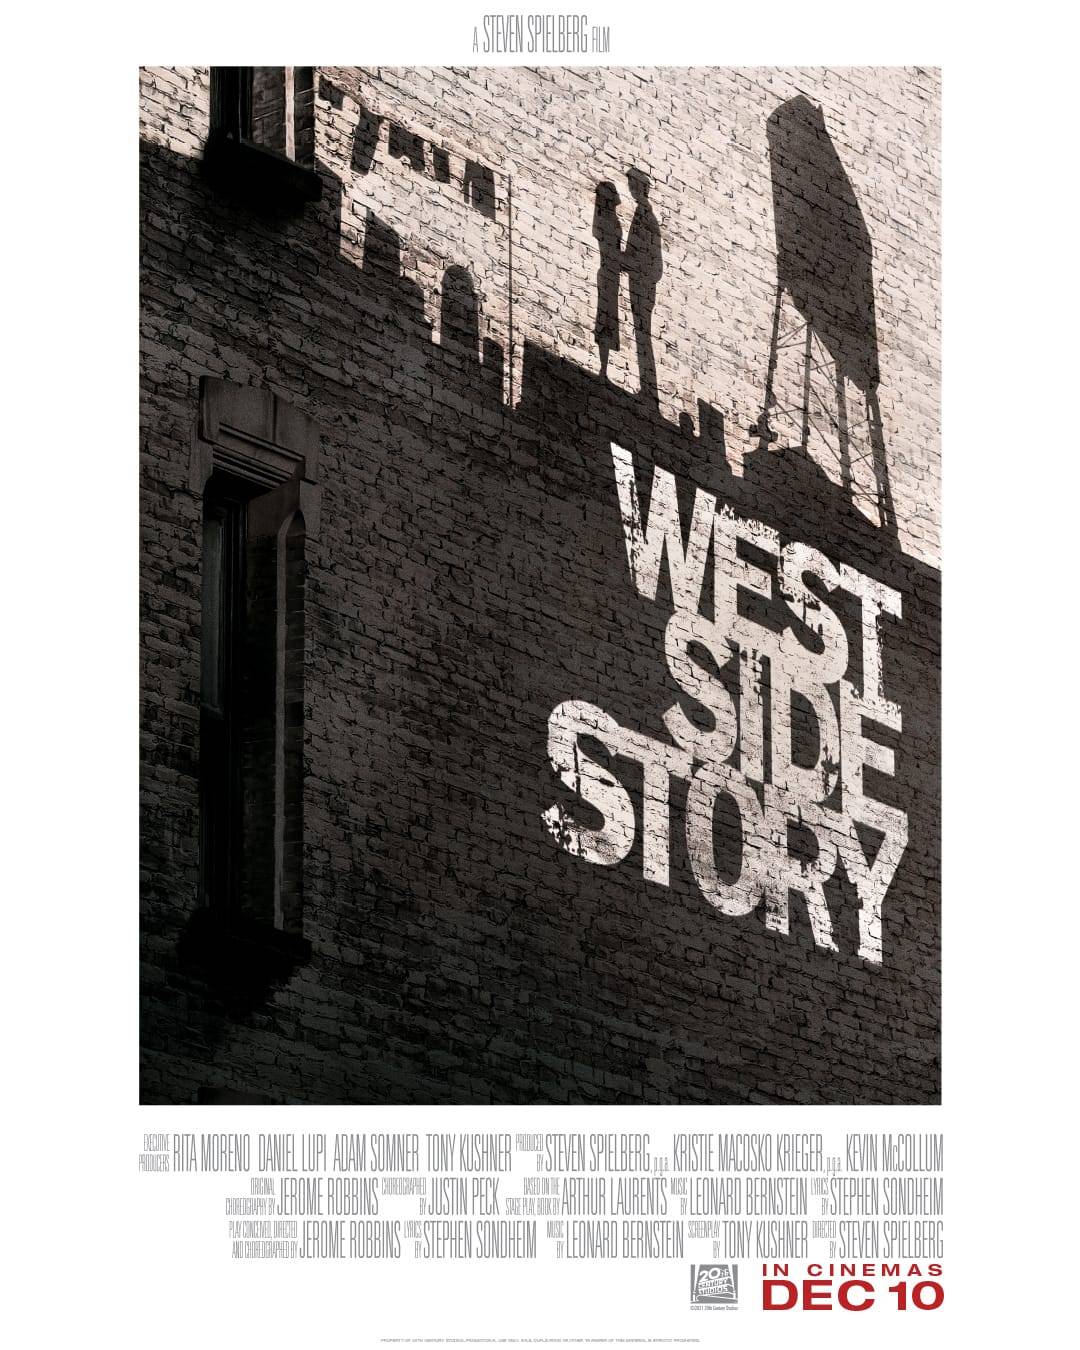 WEST SIDE STORY